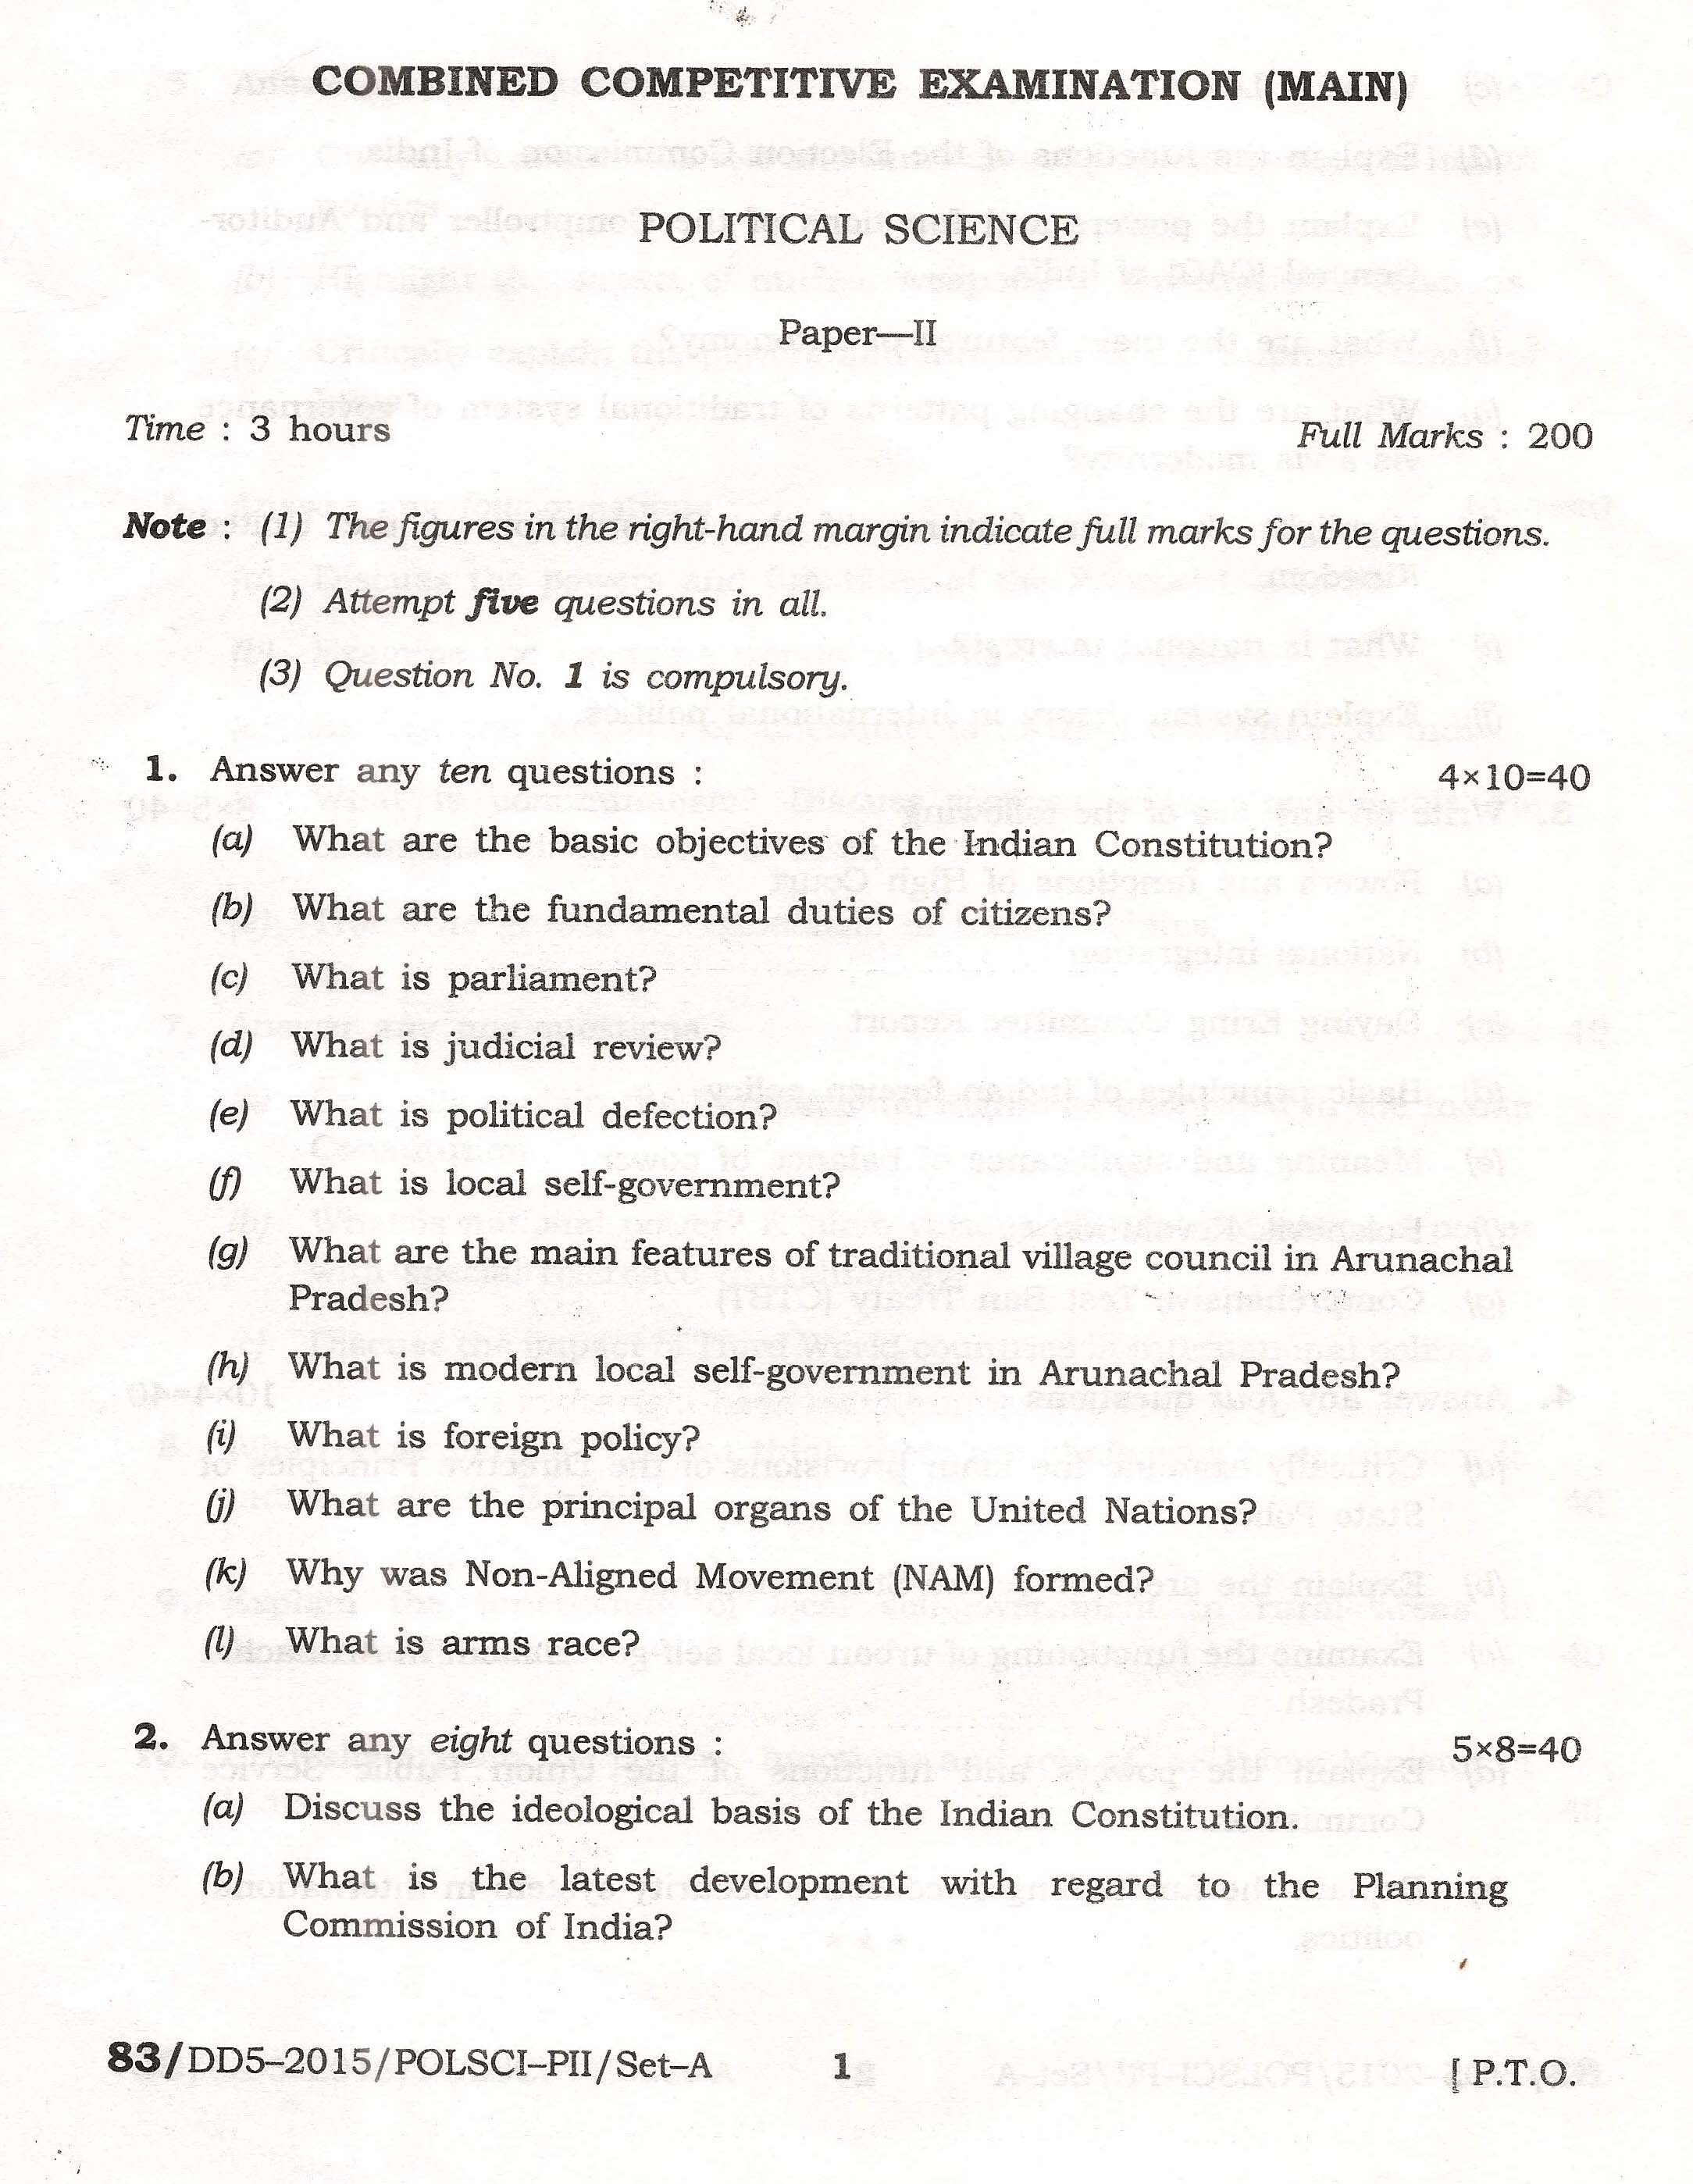 APPSC Combined Competitive Main Exam 2015 Political Science Paper II 1